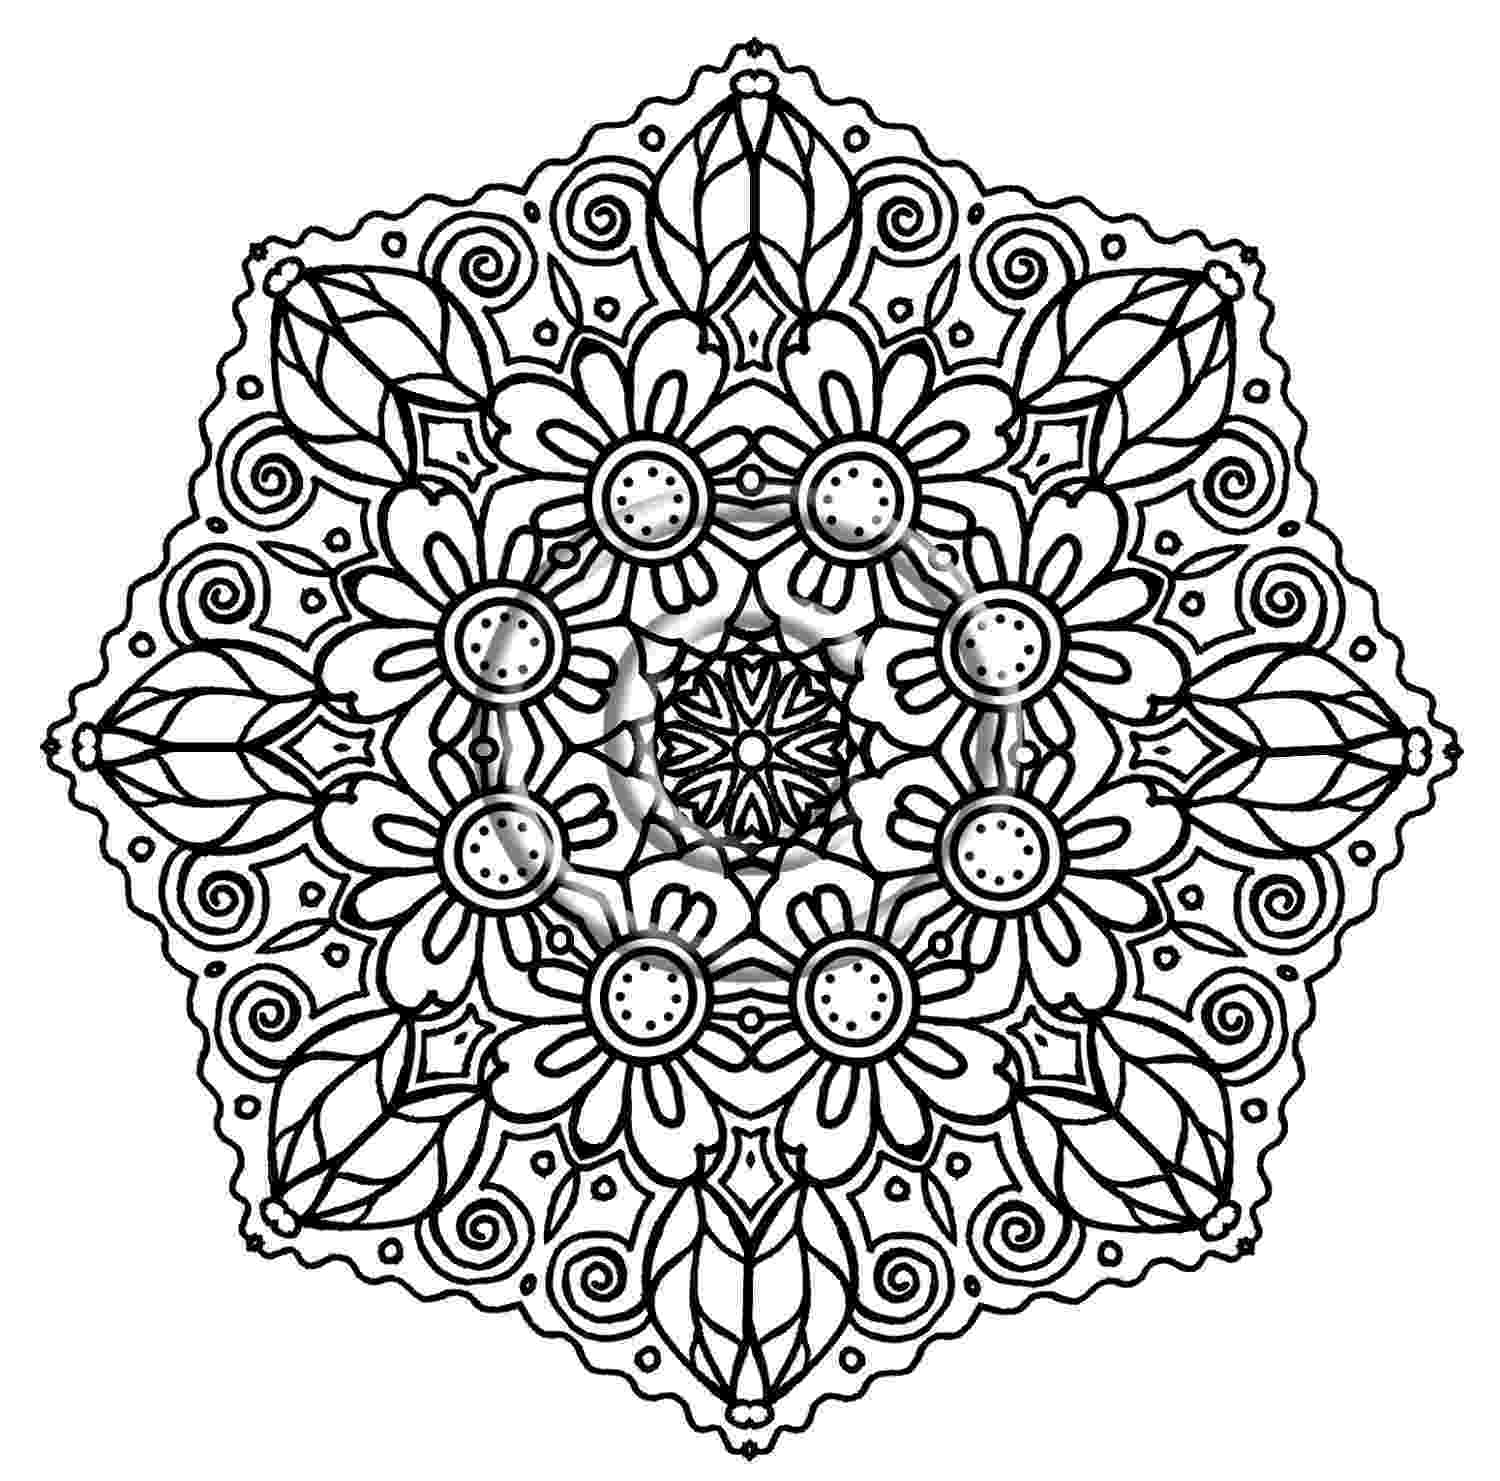 intricate designs to color detailed flower coloring pages to download and print for free to color designs intricate 